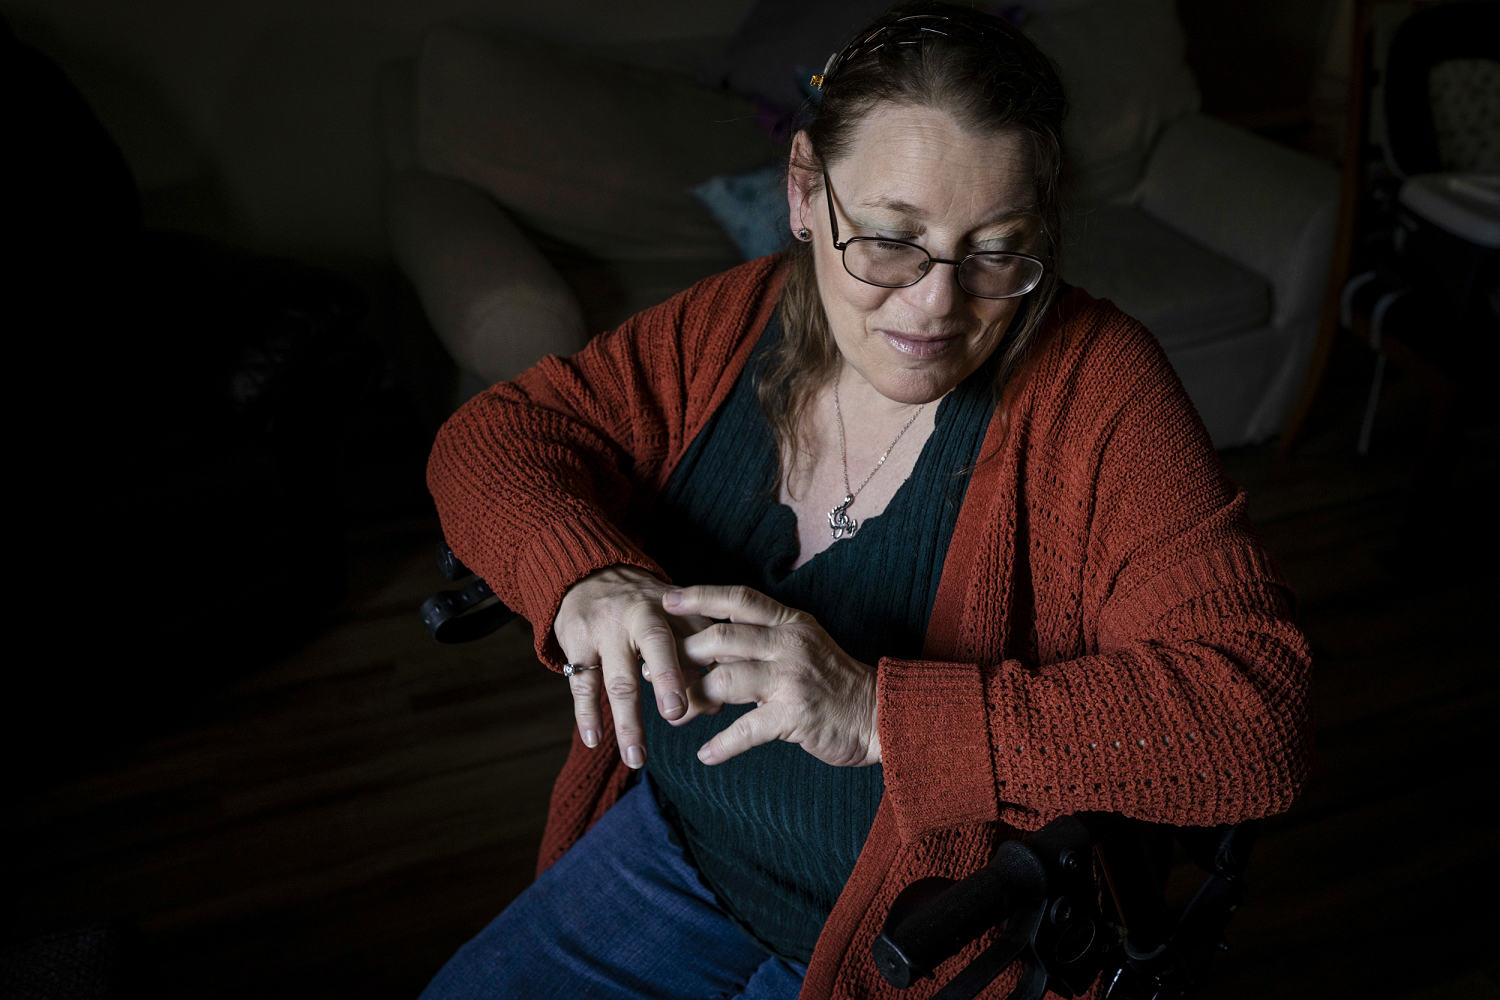 Supreme Court weighs curbing disability rights lawsuits